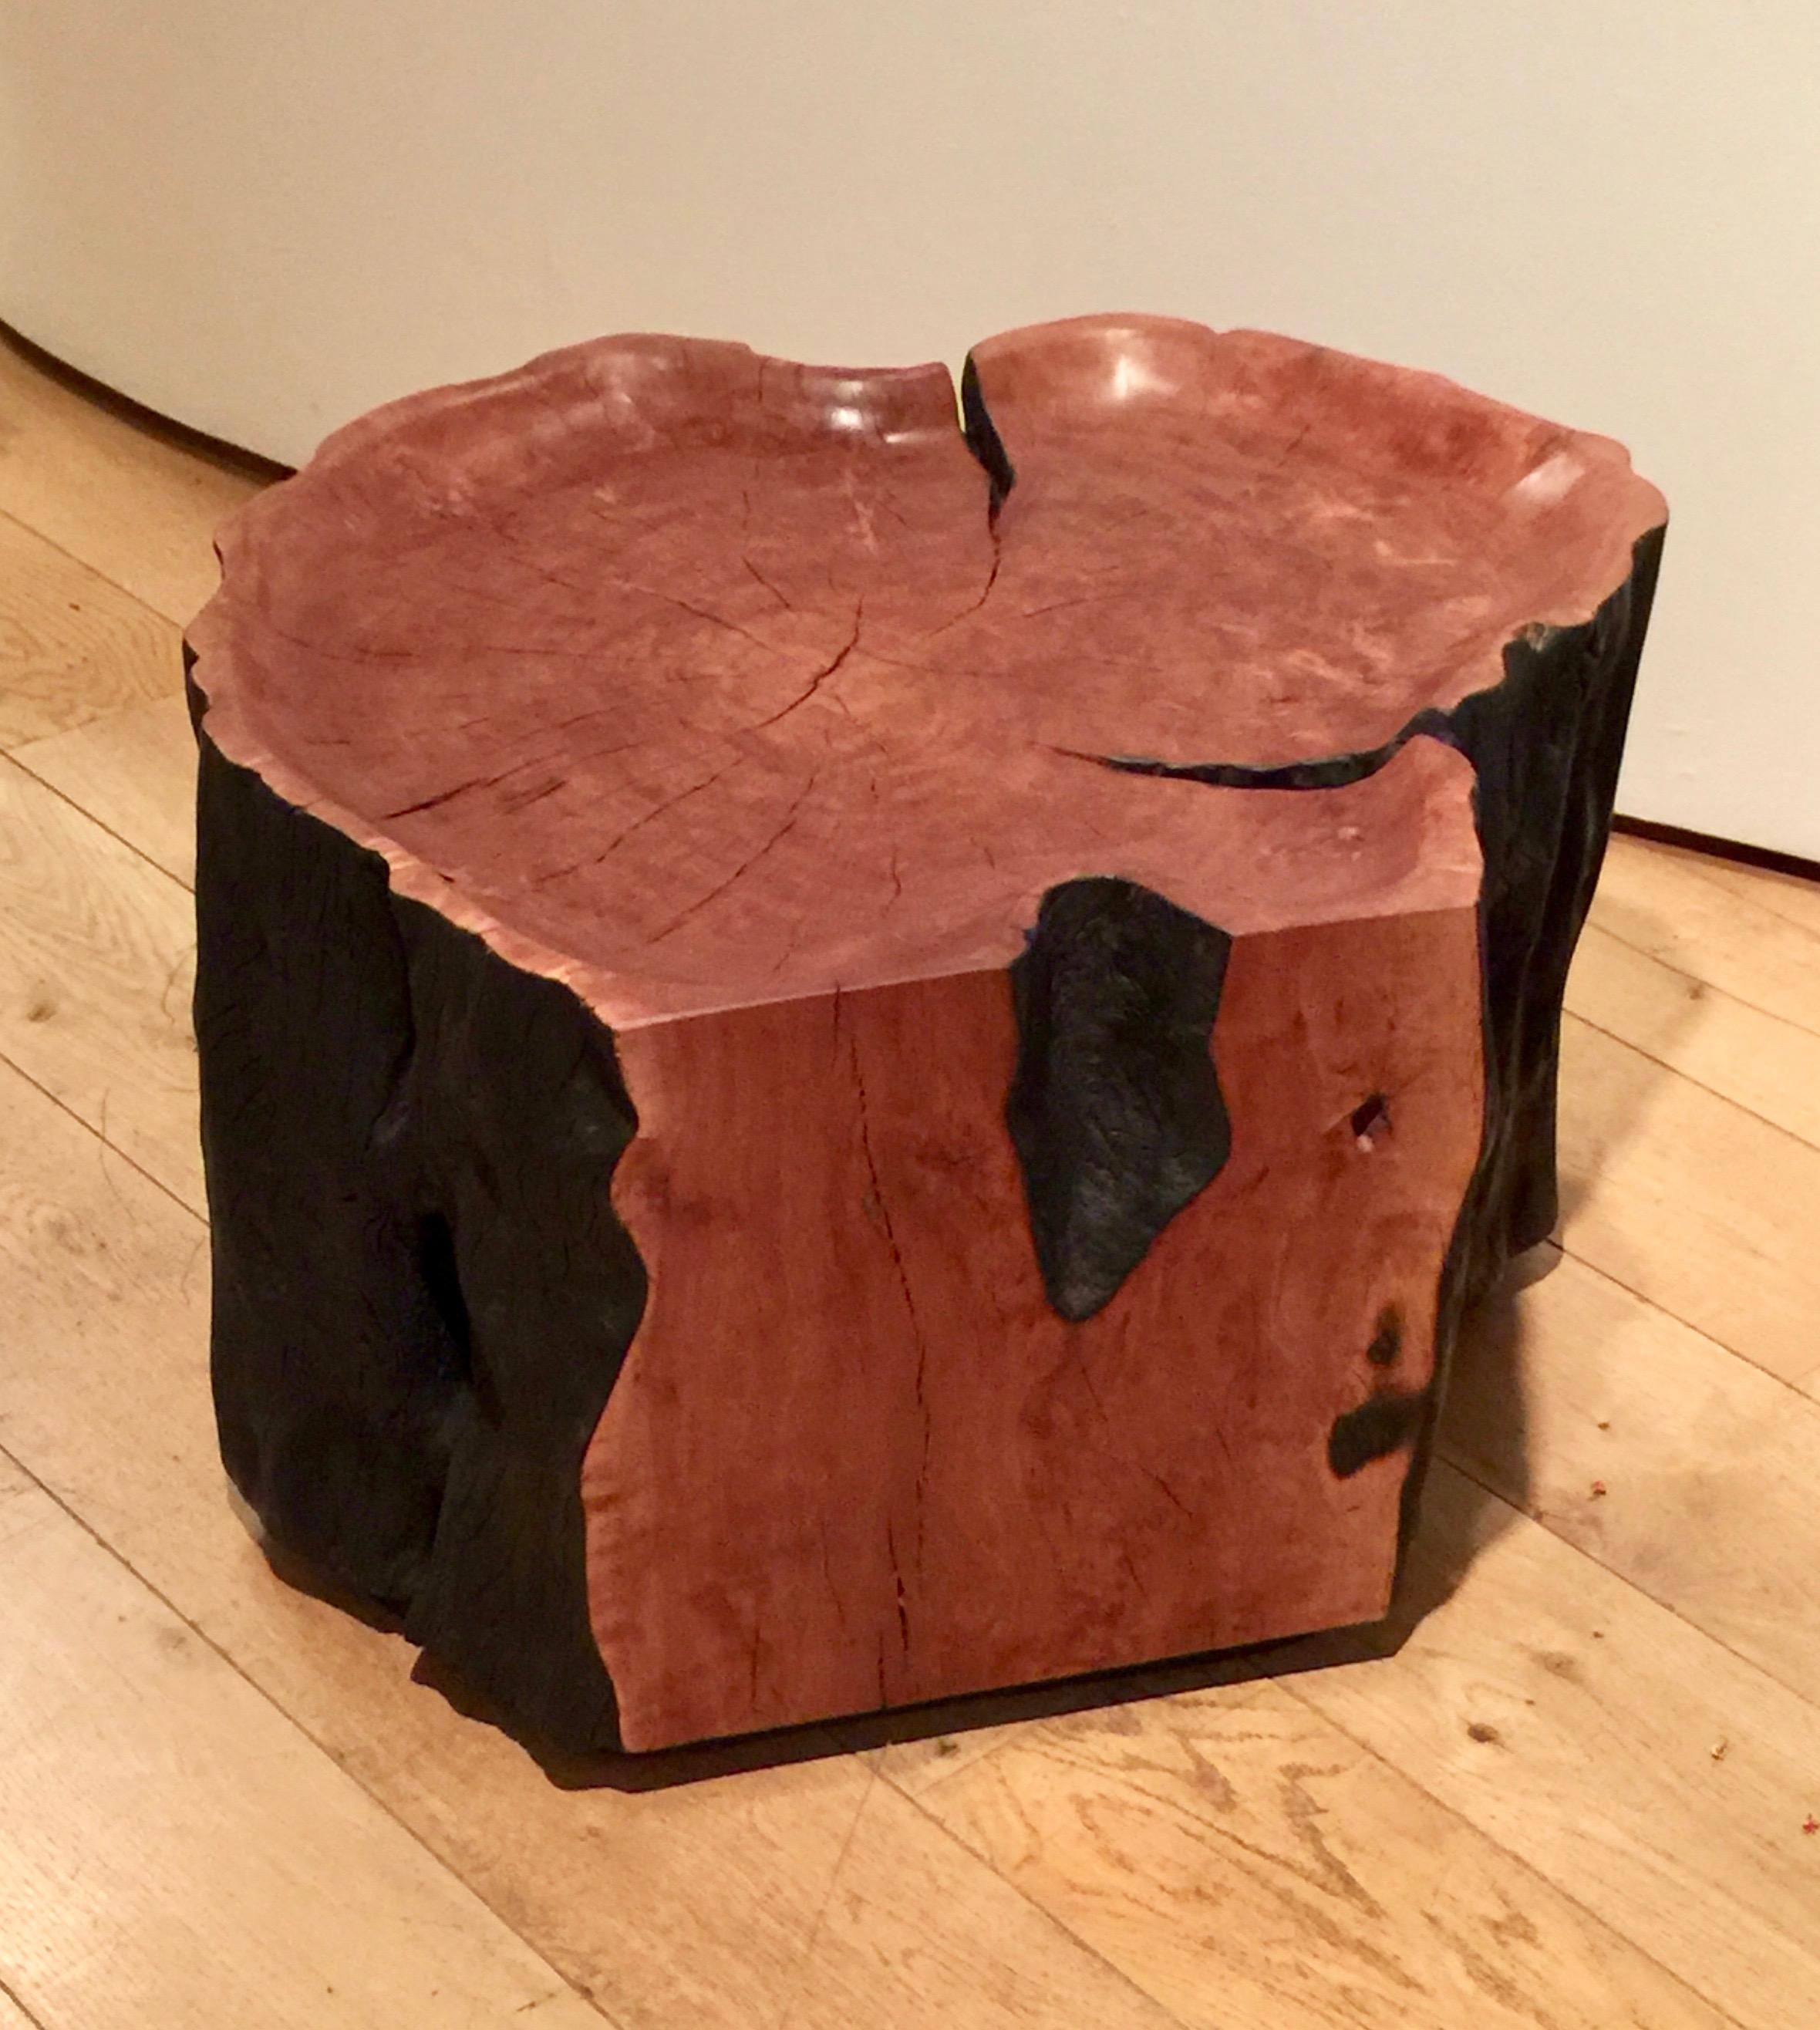 Shaped from a section of a reclaimed litchi tree trunk, the polished top has a soft finish dramatically contrasting with the natural dark bark.
 